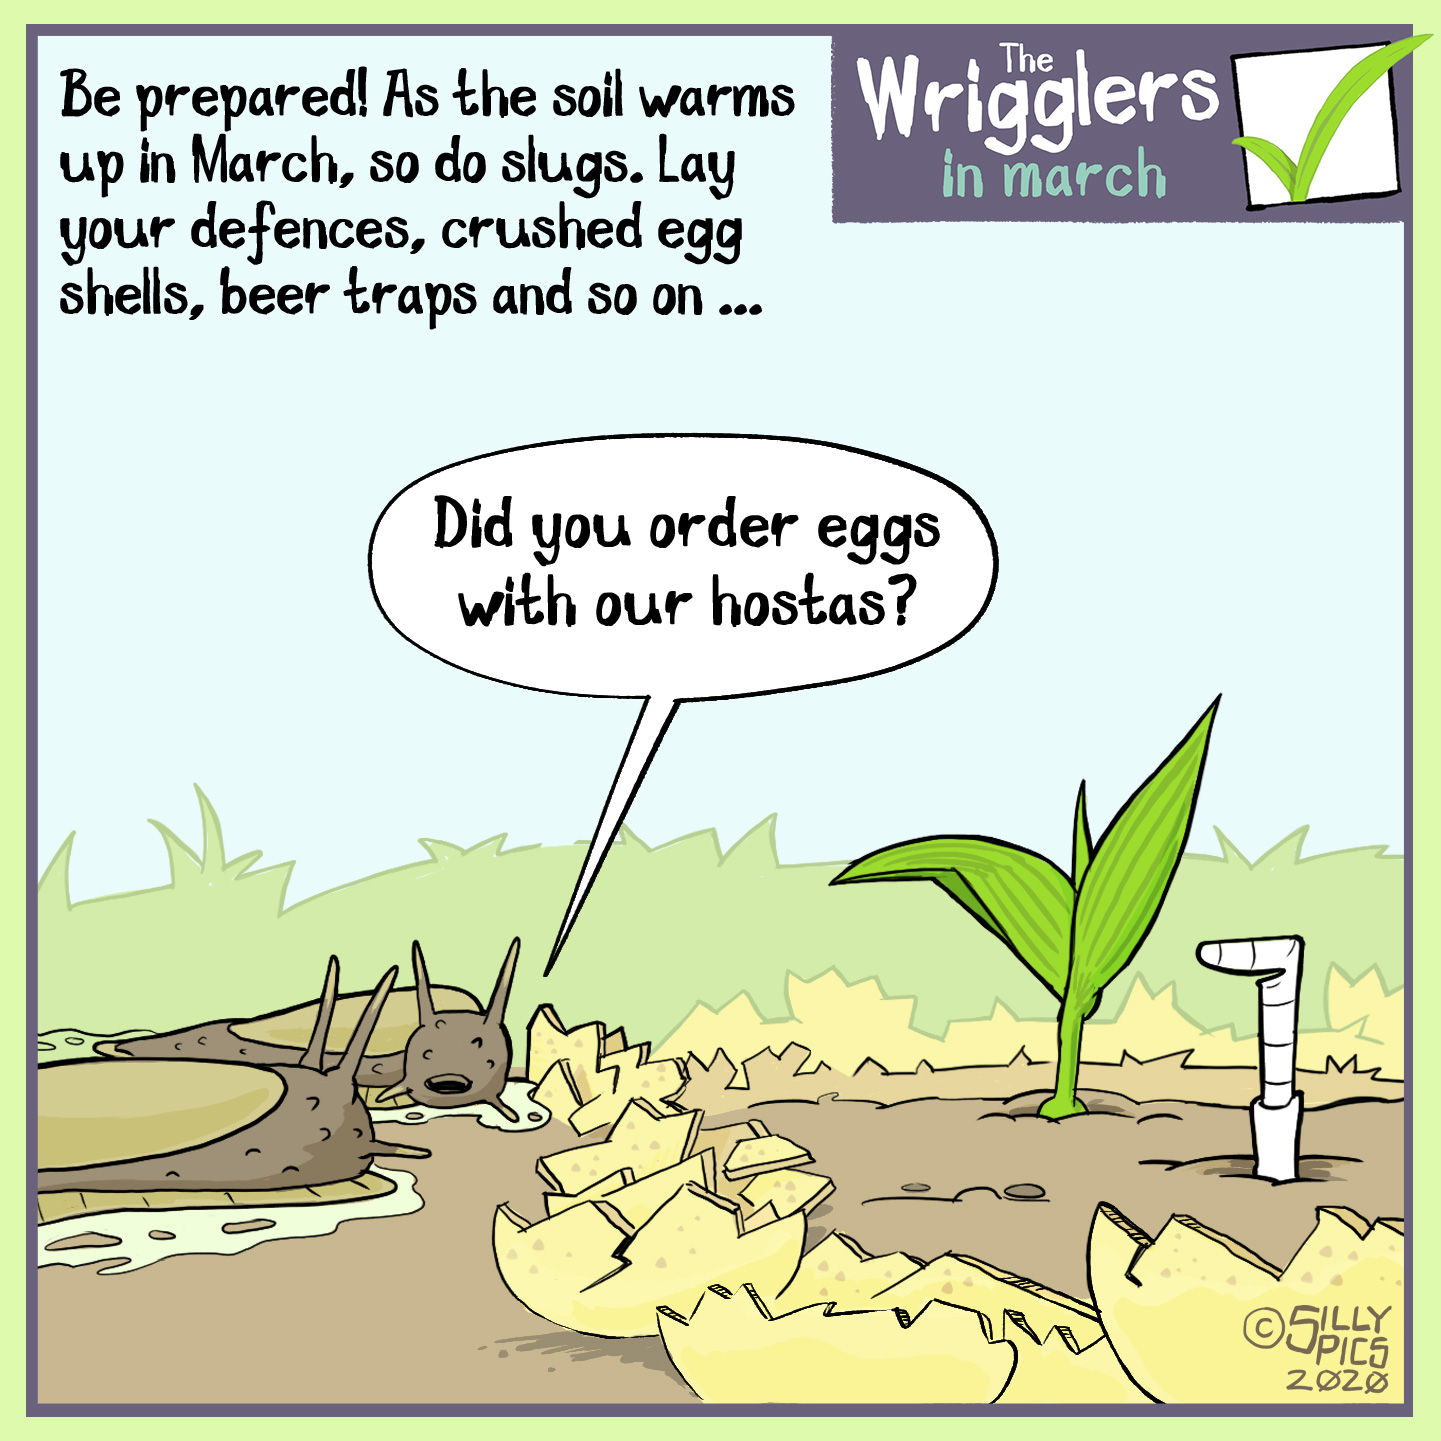 a cartoon about slugs waking up in march and finding eggshells around their plants – one slug asks, "did you order eggs with your hosta?